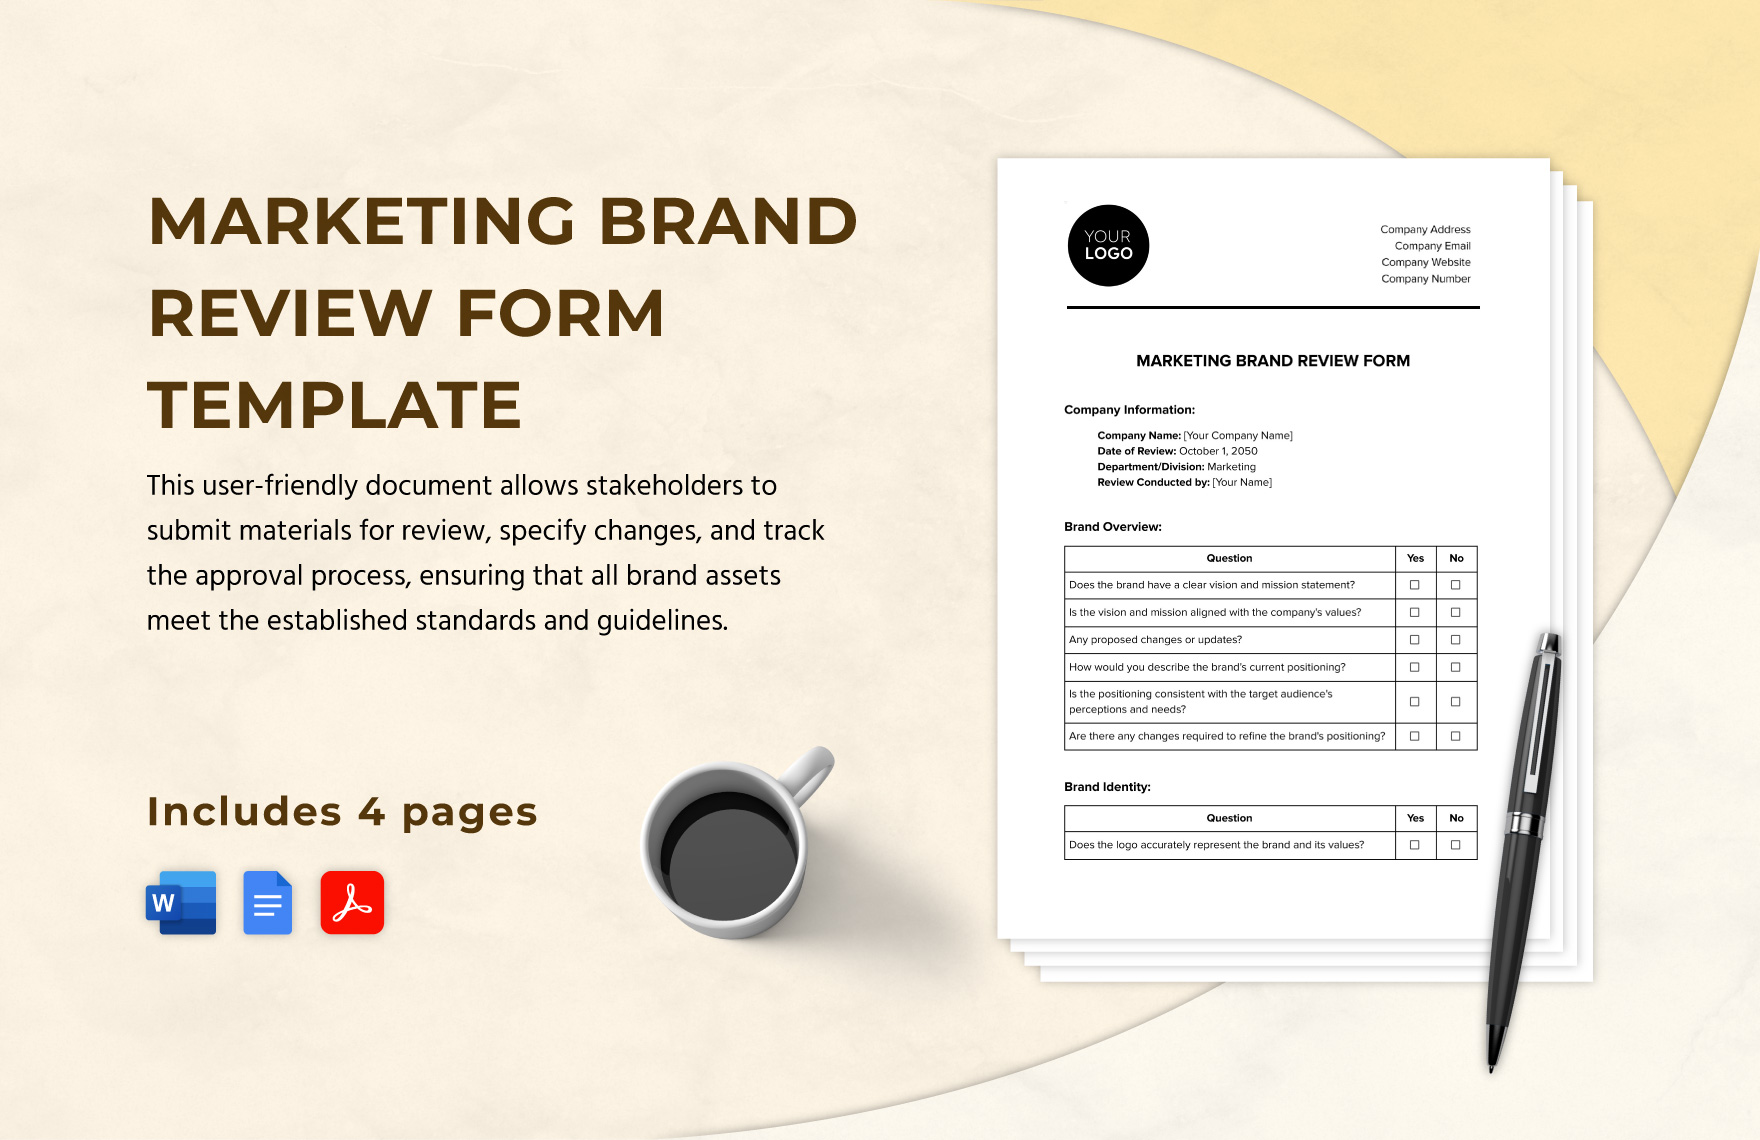 Marketing Brand Review Form Template in Word, Google Docs, PDF